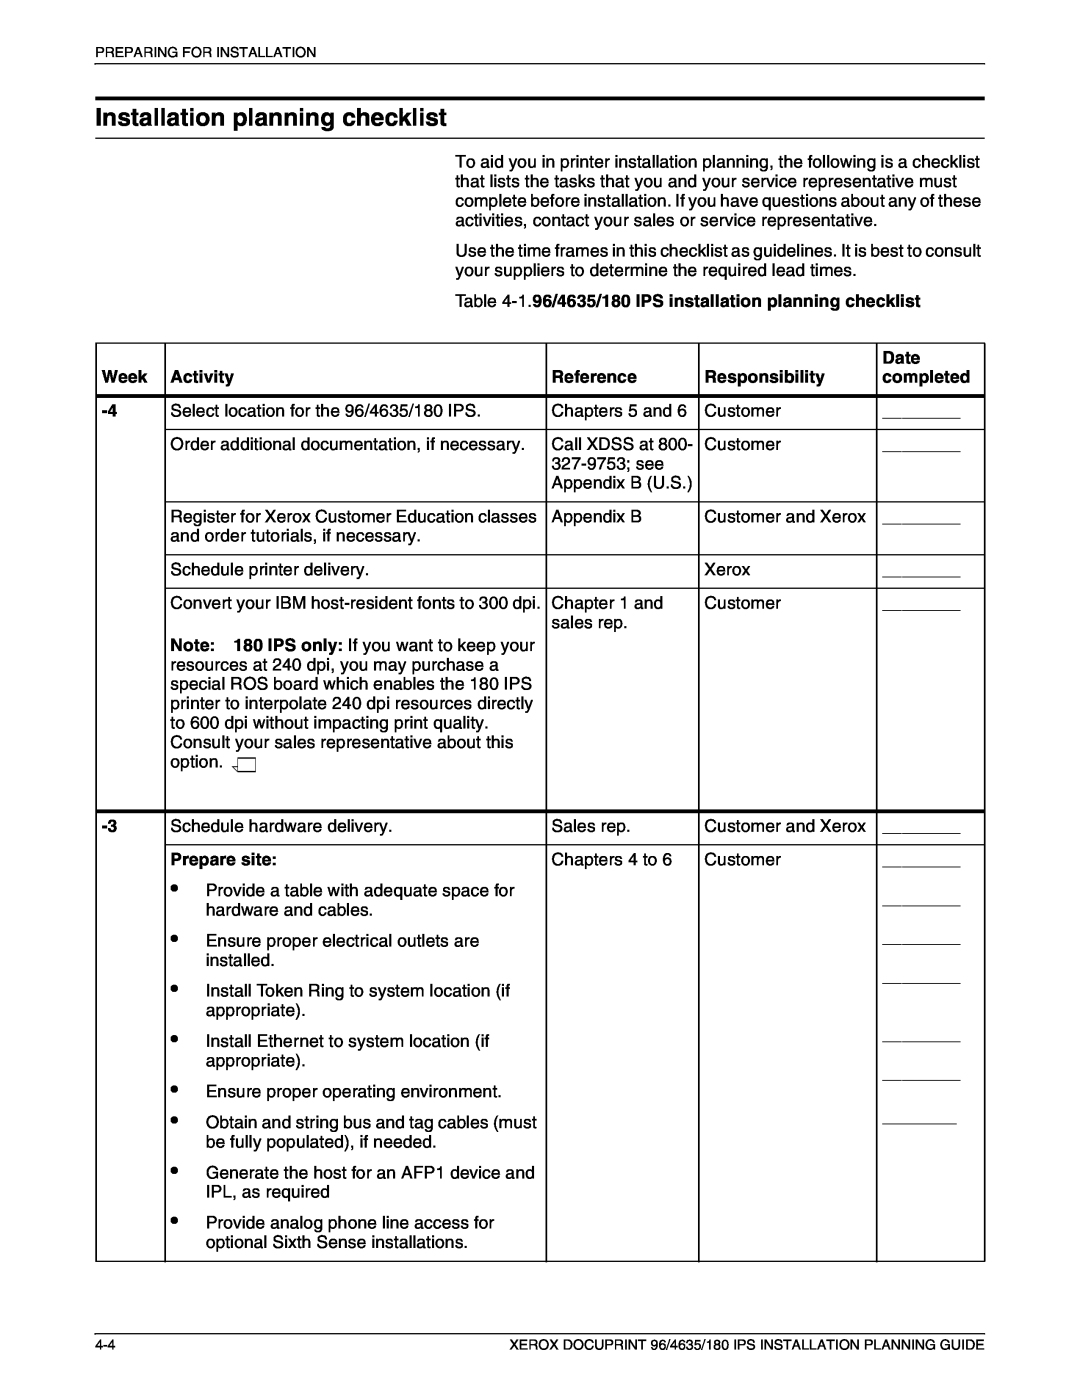 Xerox 180 IPS Installation planning checklist, Date, Week, Activity, Reference, Responsibility, completed, Prepare site 